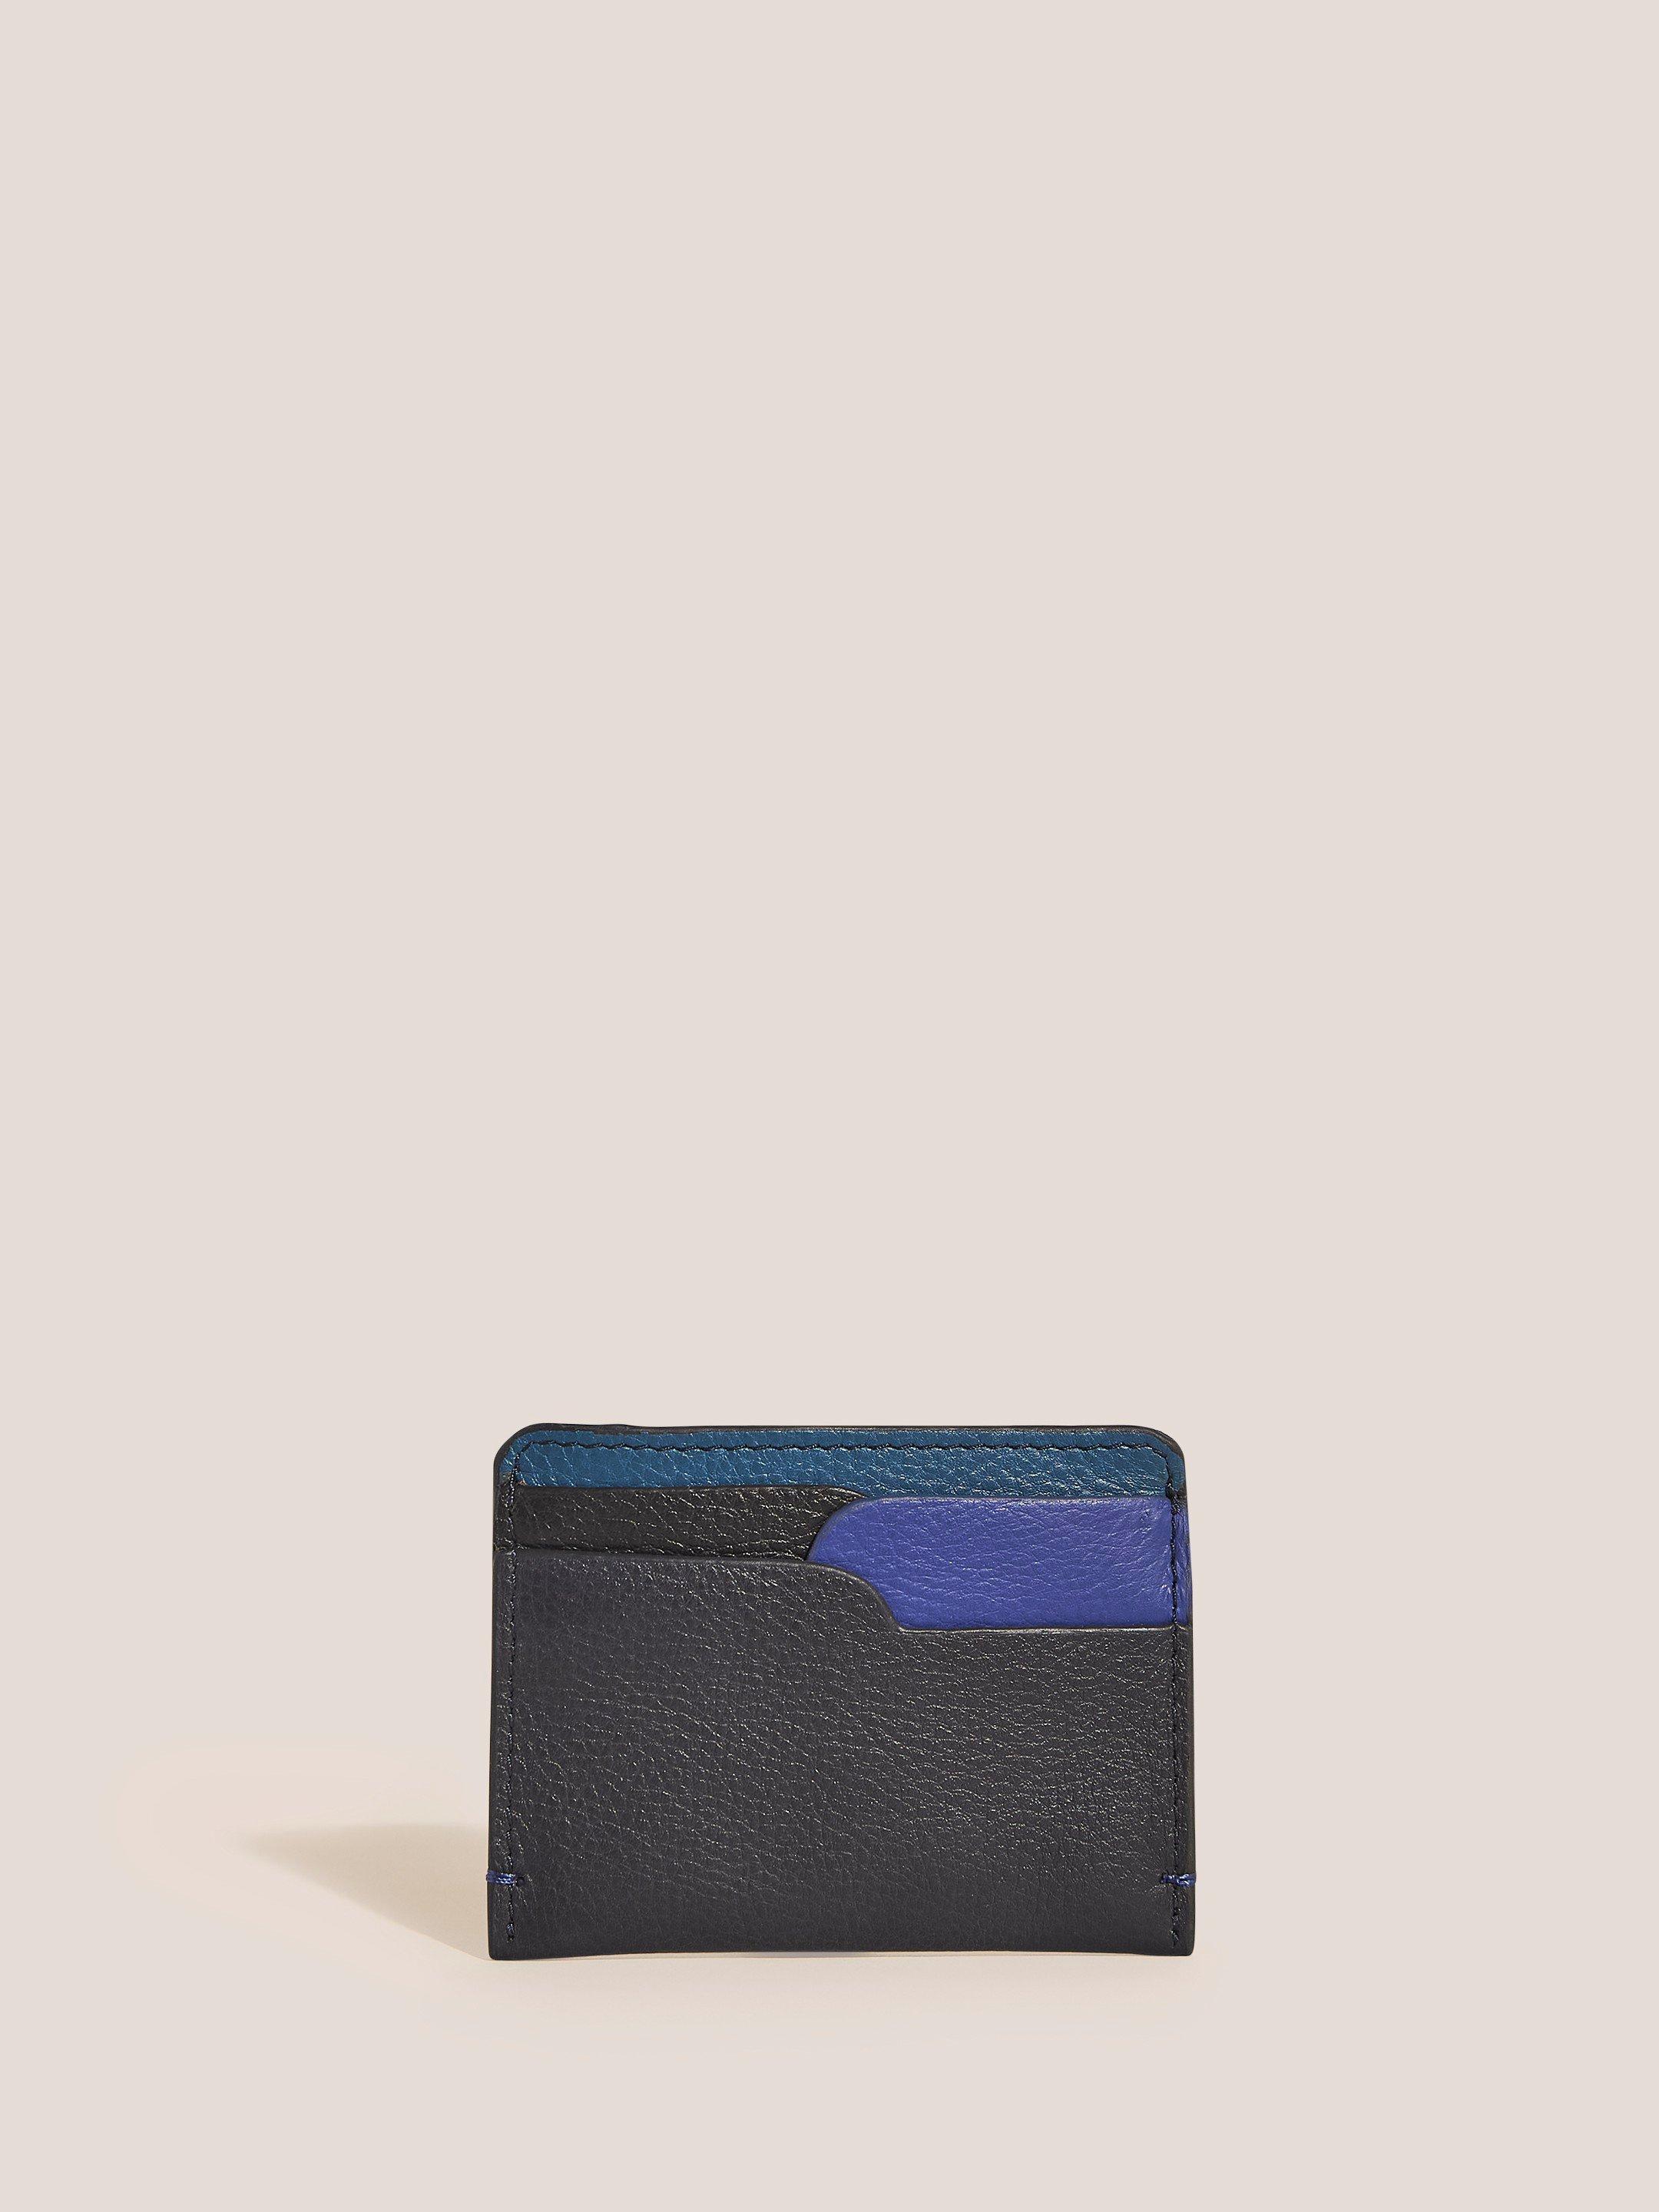 Abstract Leather Cardholder in NAVY MULTI - FLAT FRONT